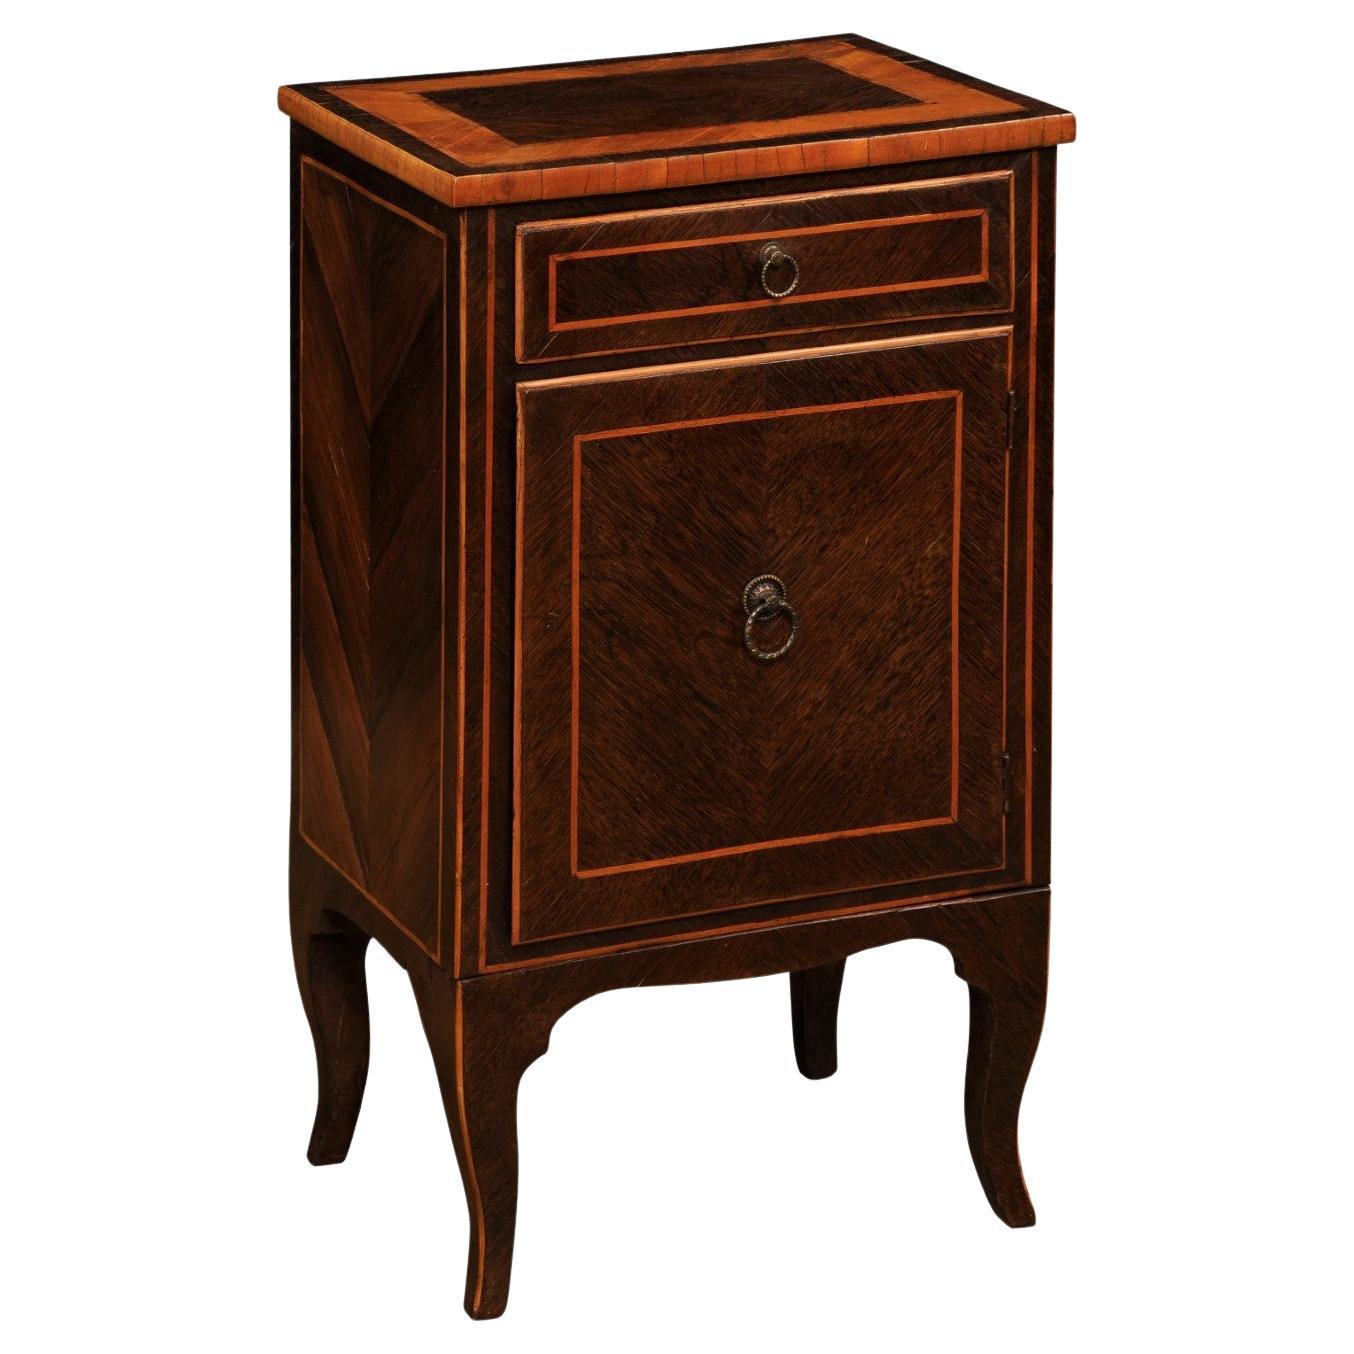 Italian 19th Century Bedside Table with Inlaid Décor, Single Drawer and Door For Sale